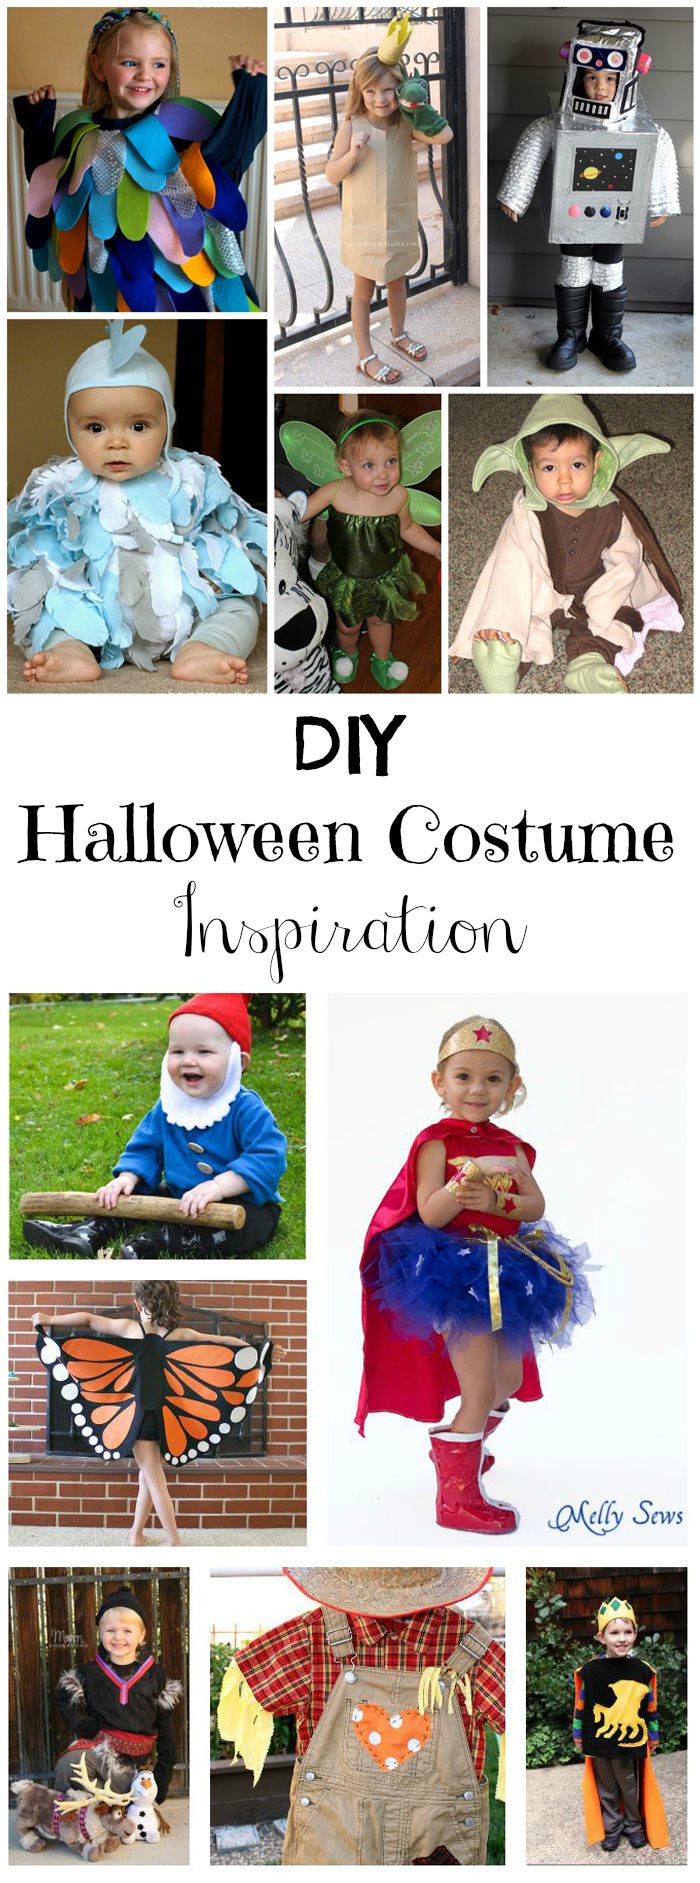 DIY Halloween Costume Inspiration by ResearchParent.com